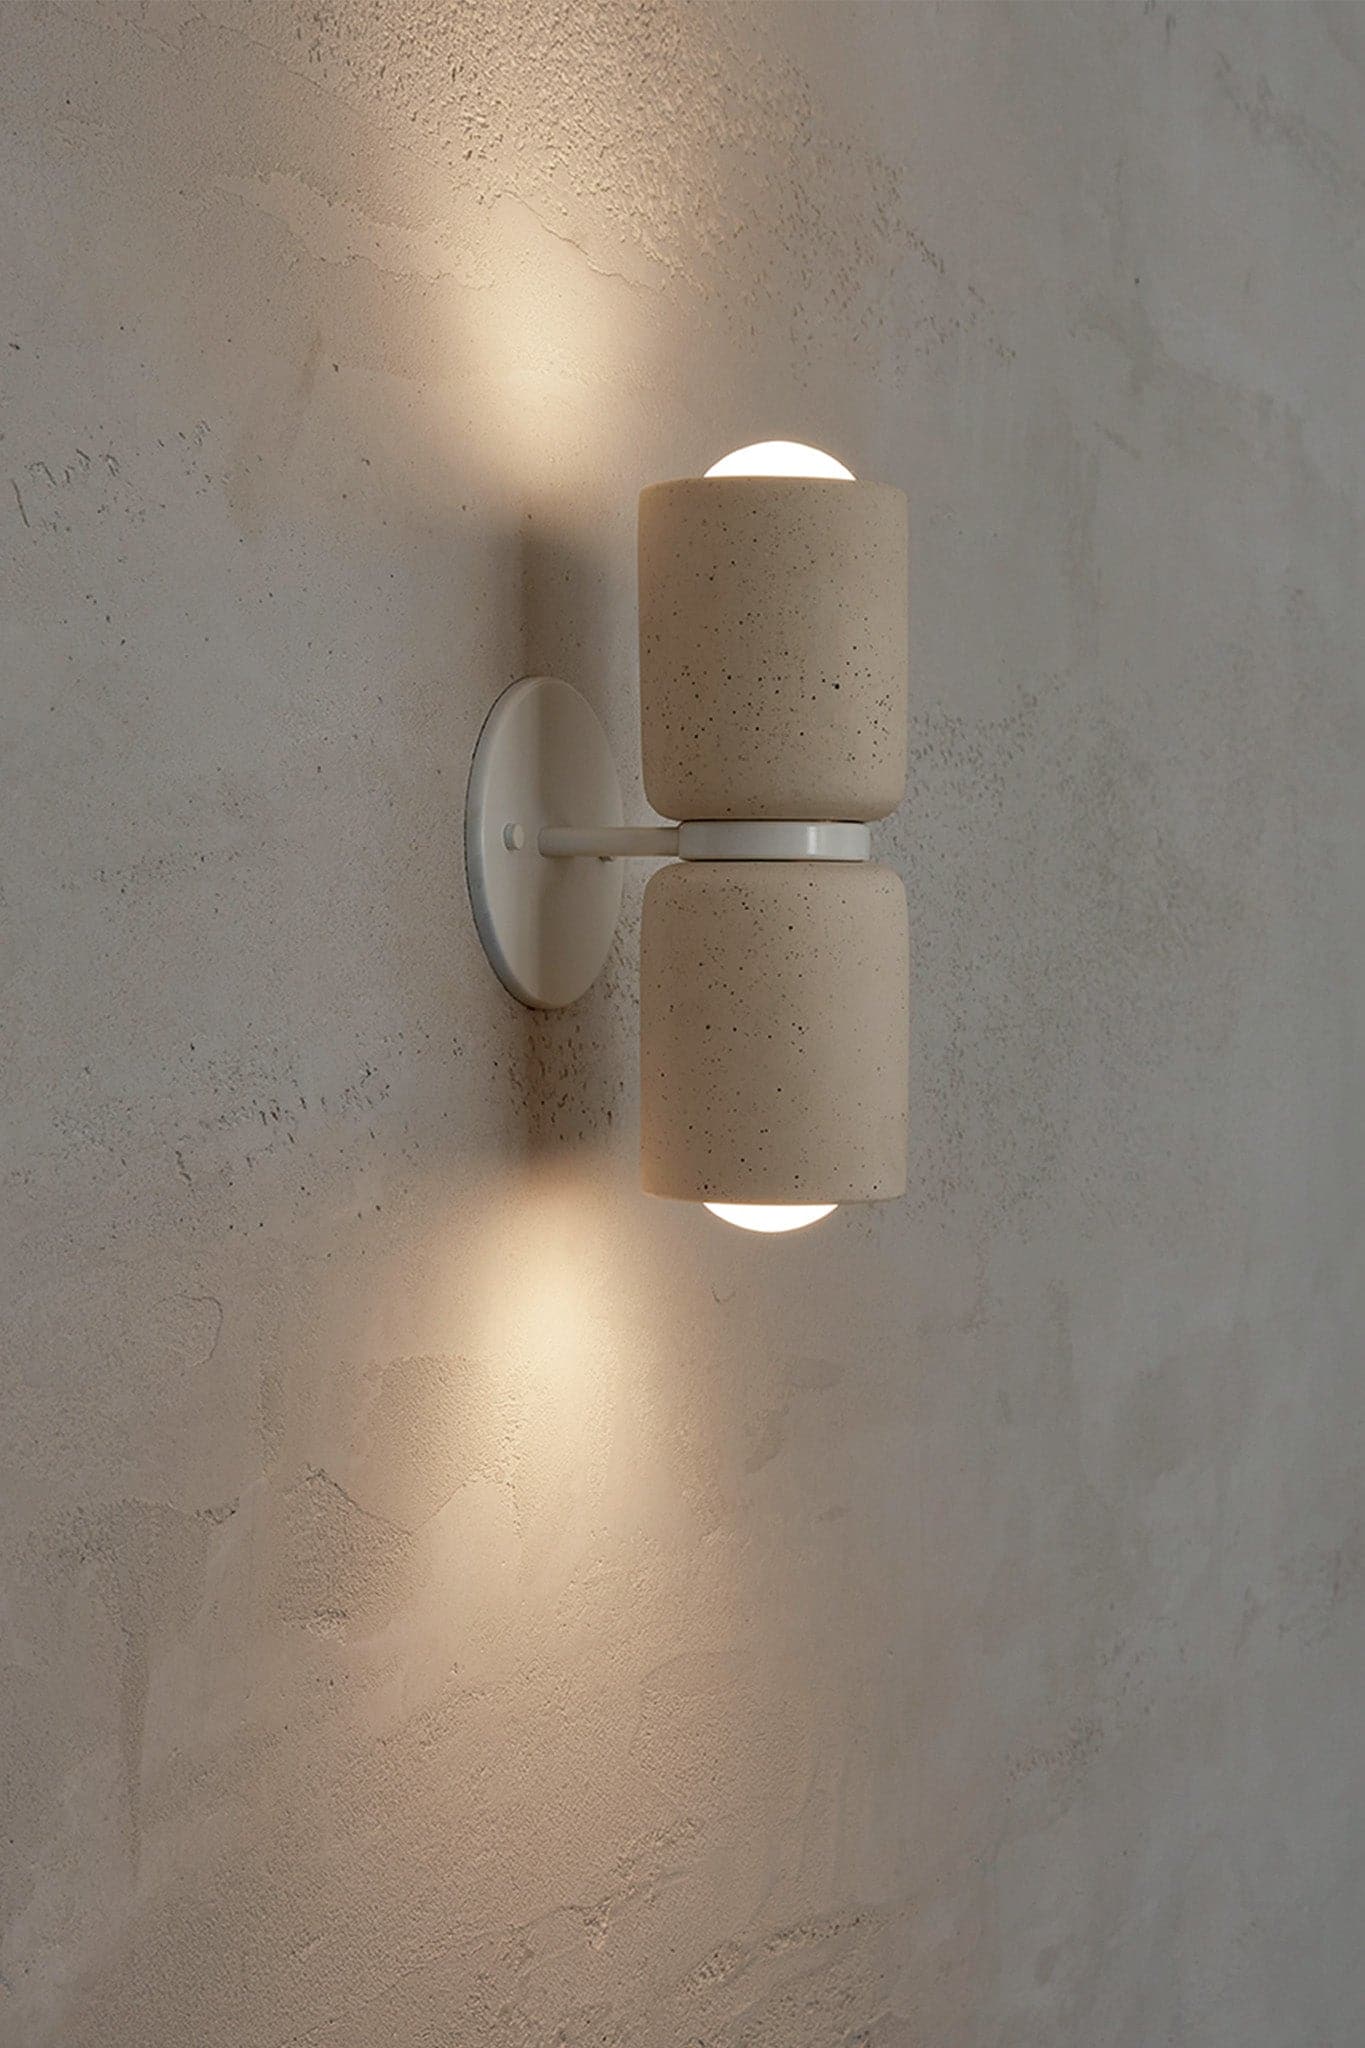 Marz Designs Terra 2 Wall Light in White Satin/Vanilla Bean with the lights on.